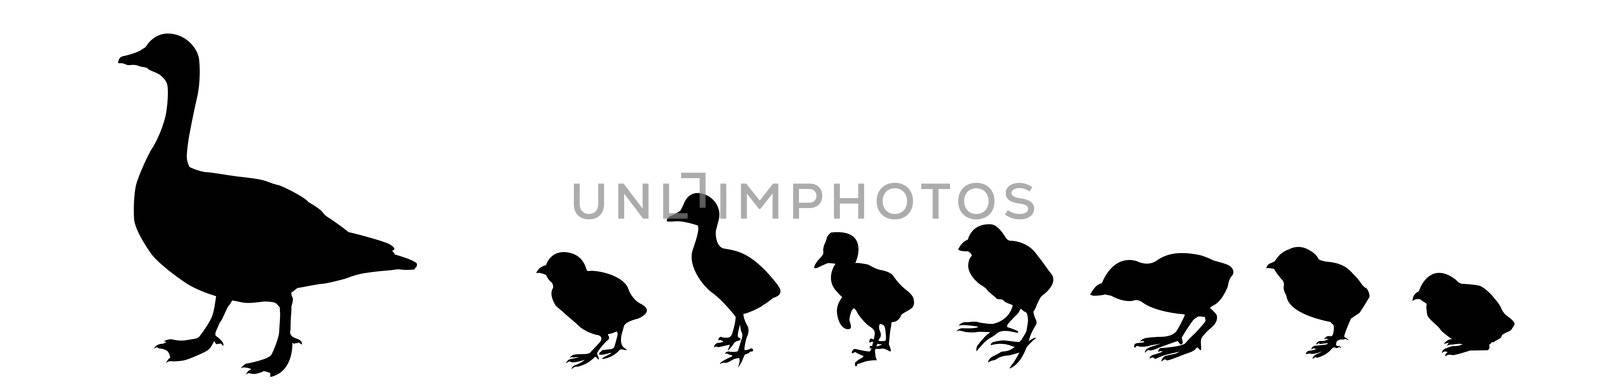 vector silhouette duck with nestling on white background by basel101658